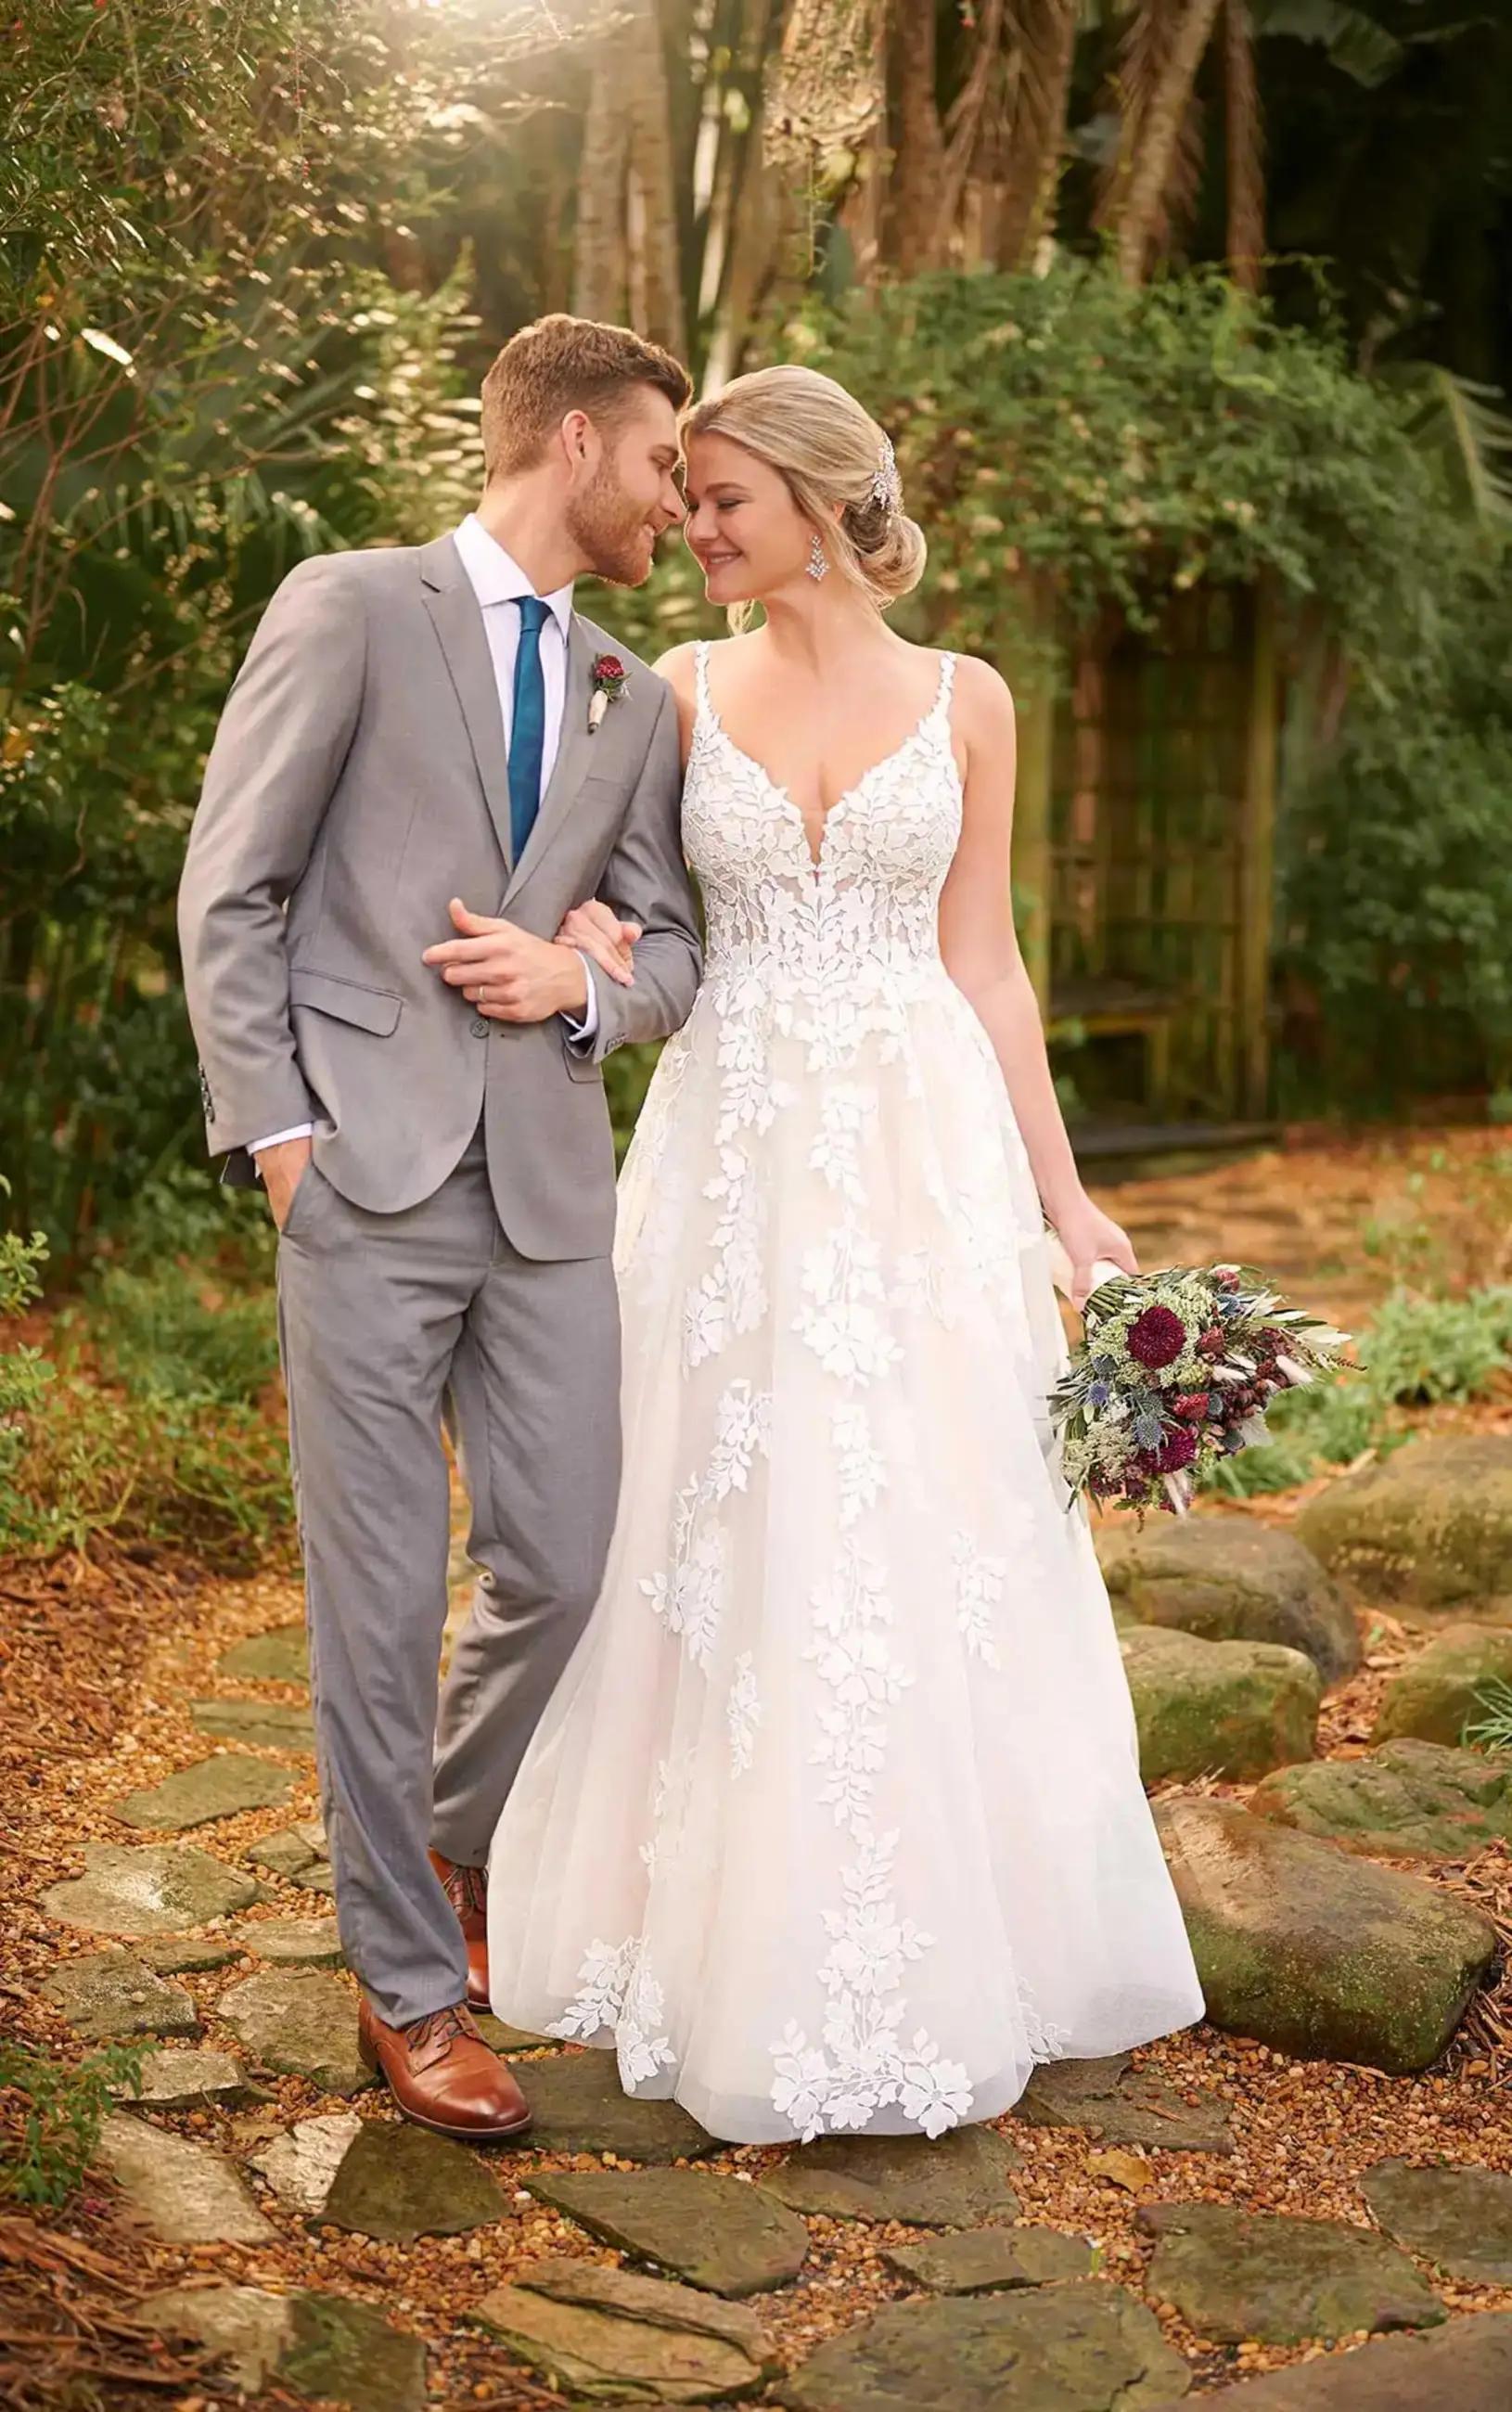 Finding Your Dream Designer Wedding Gown at Dearly Consignment Bridal Image